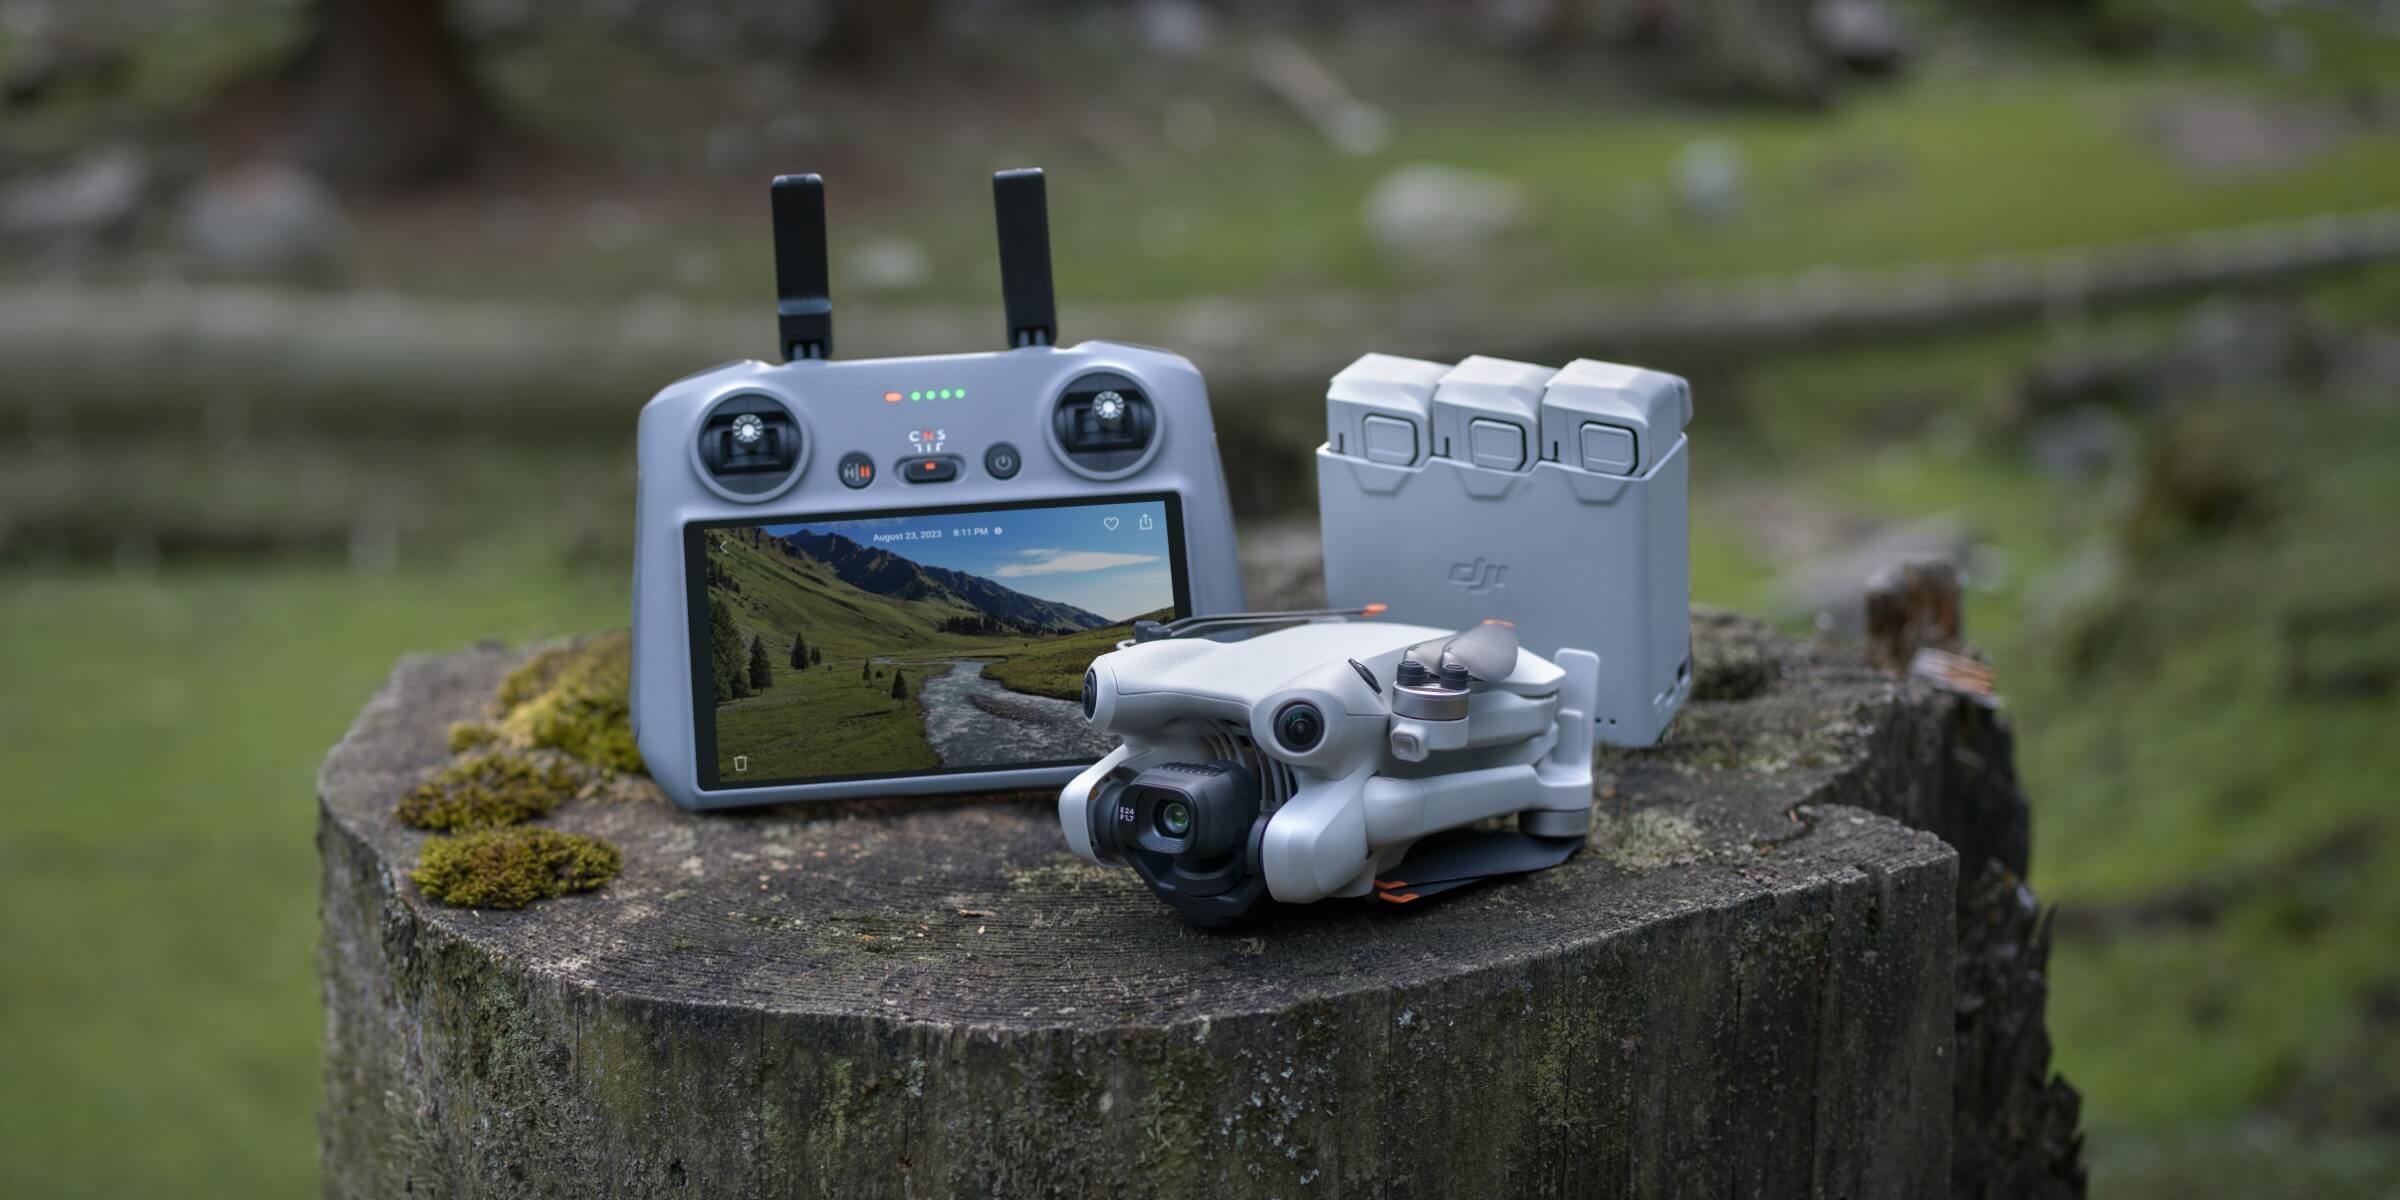 The Mini 4 Pro boasts an extended flight time of up to 34 minutes thanks to its improved battery efficiency.